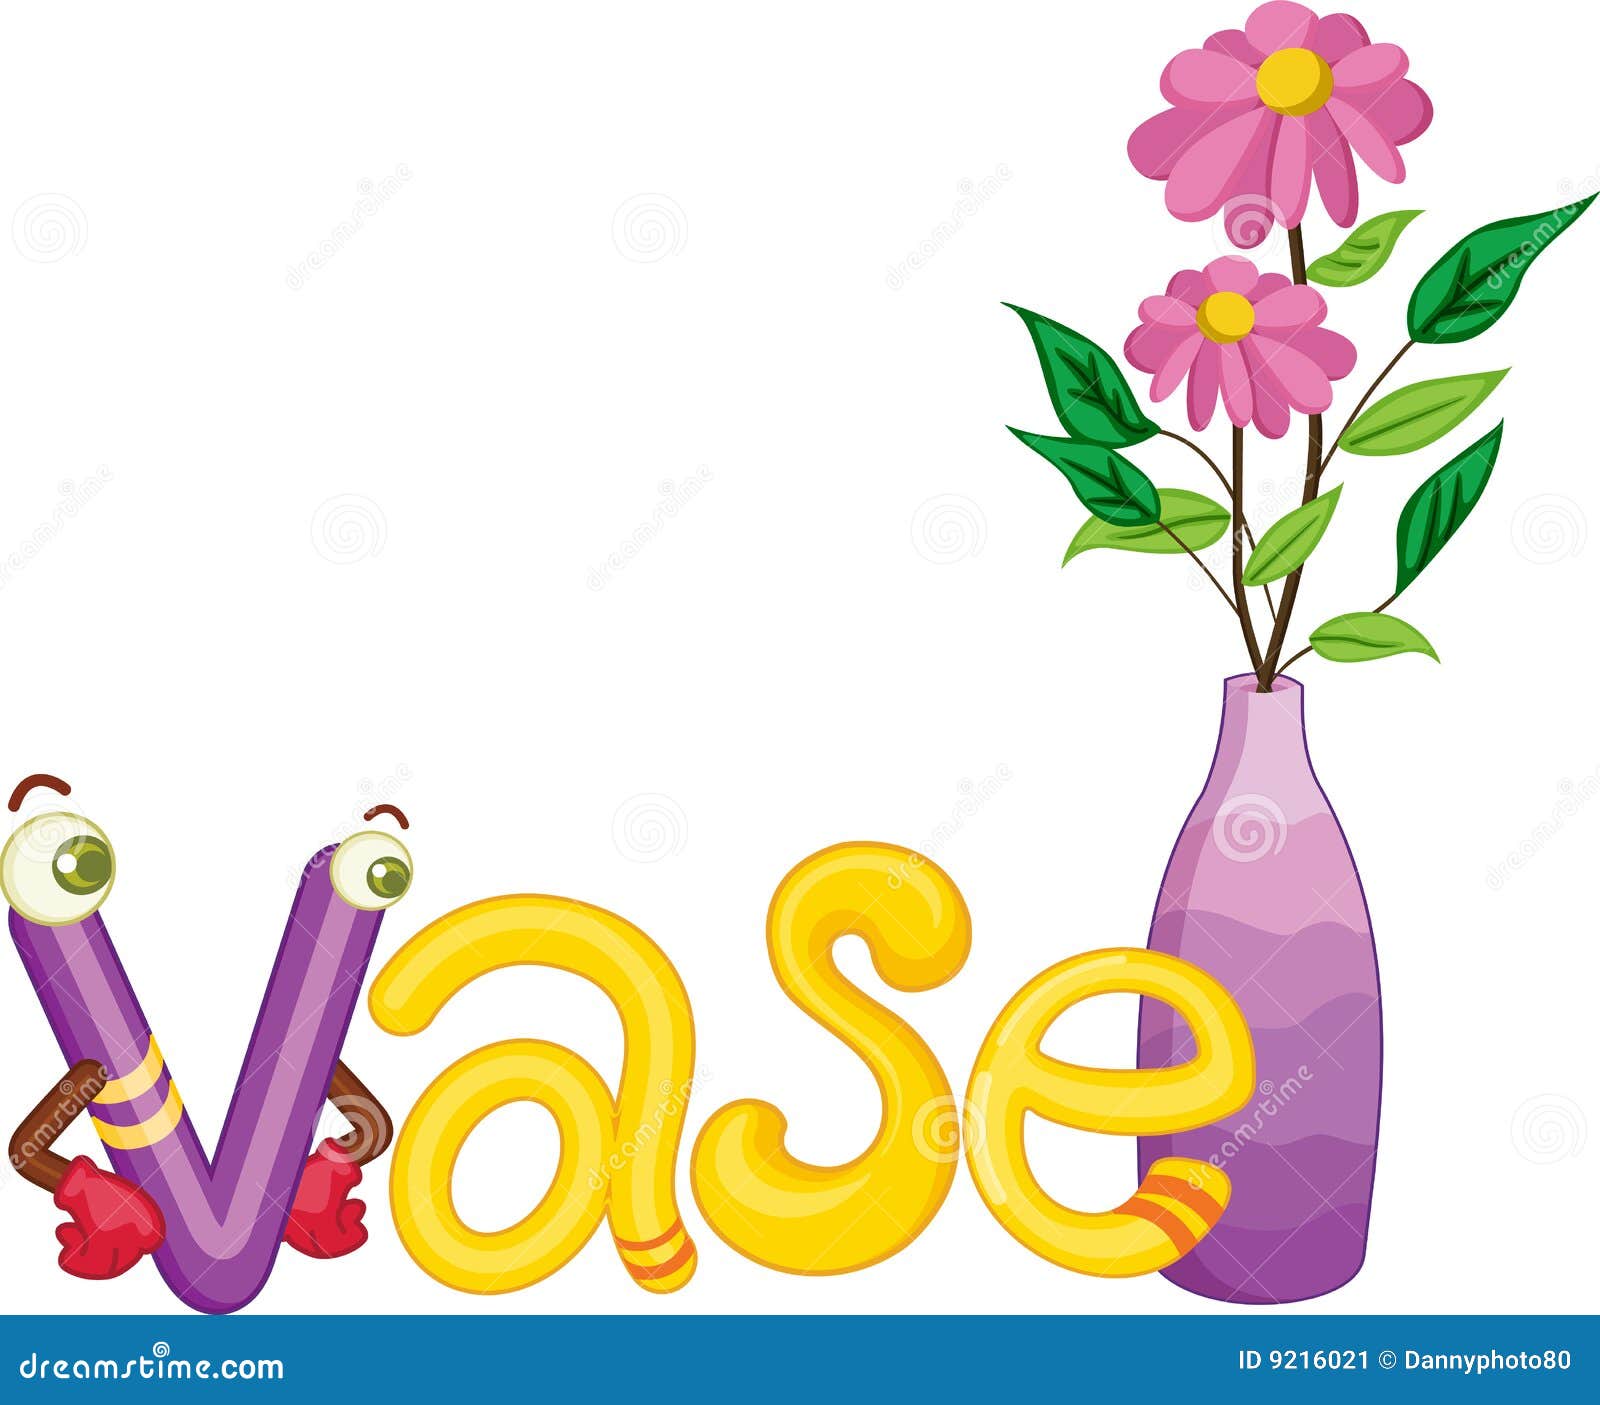 V for vase stock illustration. Image of space, isolated - 9216021